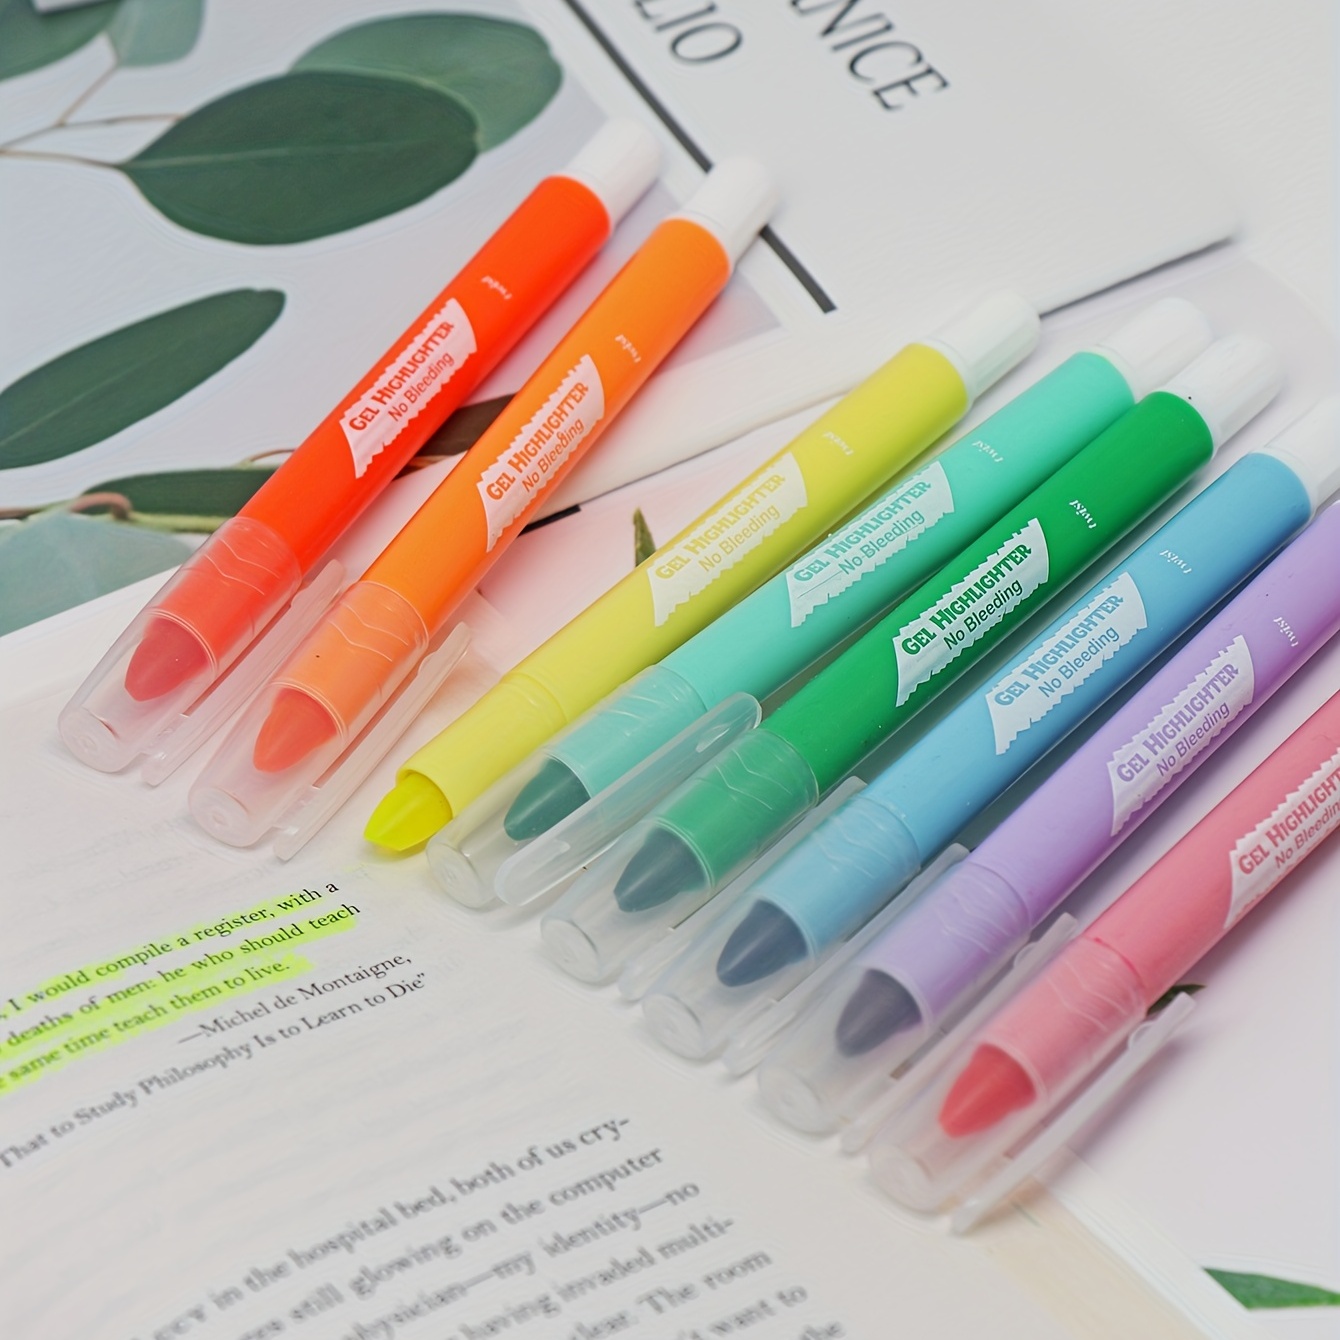 Bible Highlighters and Pens No Bleed, 8 Pack, Bible Journaling Kit, Bible Pens  No Bleed Through, Gel Highlighters/markers Bible Study Kit, 